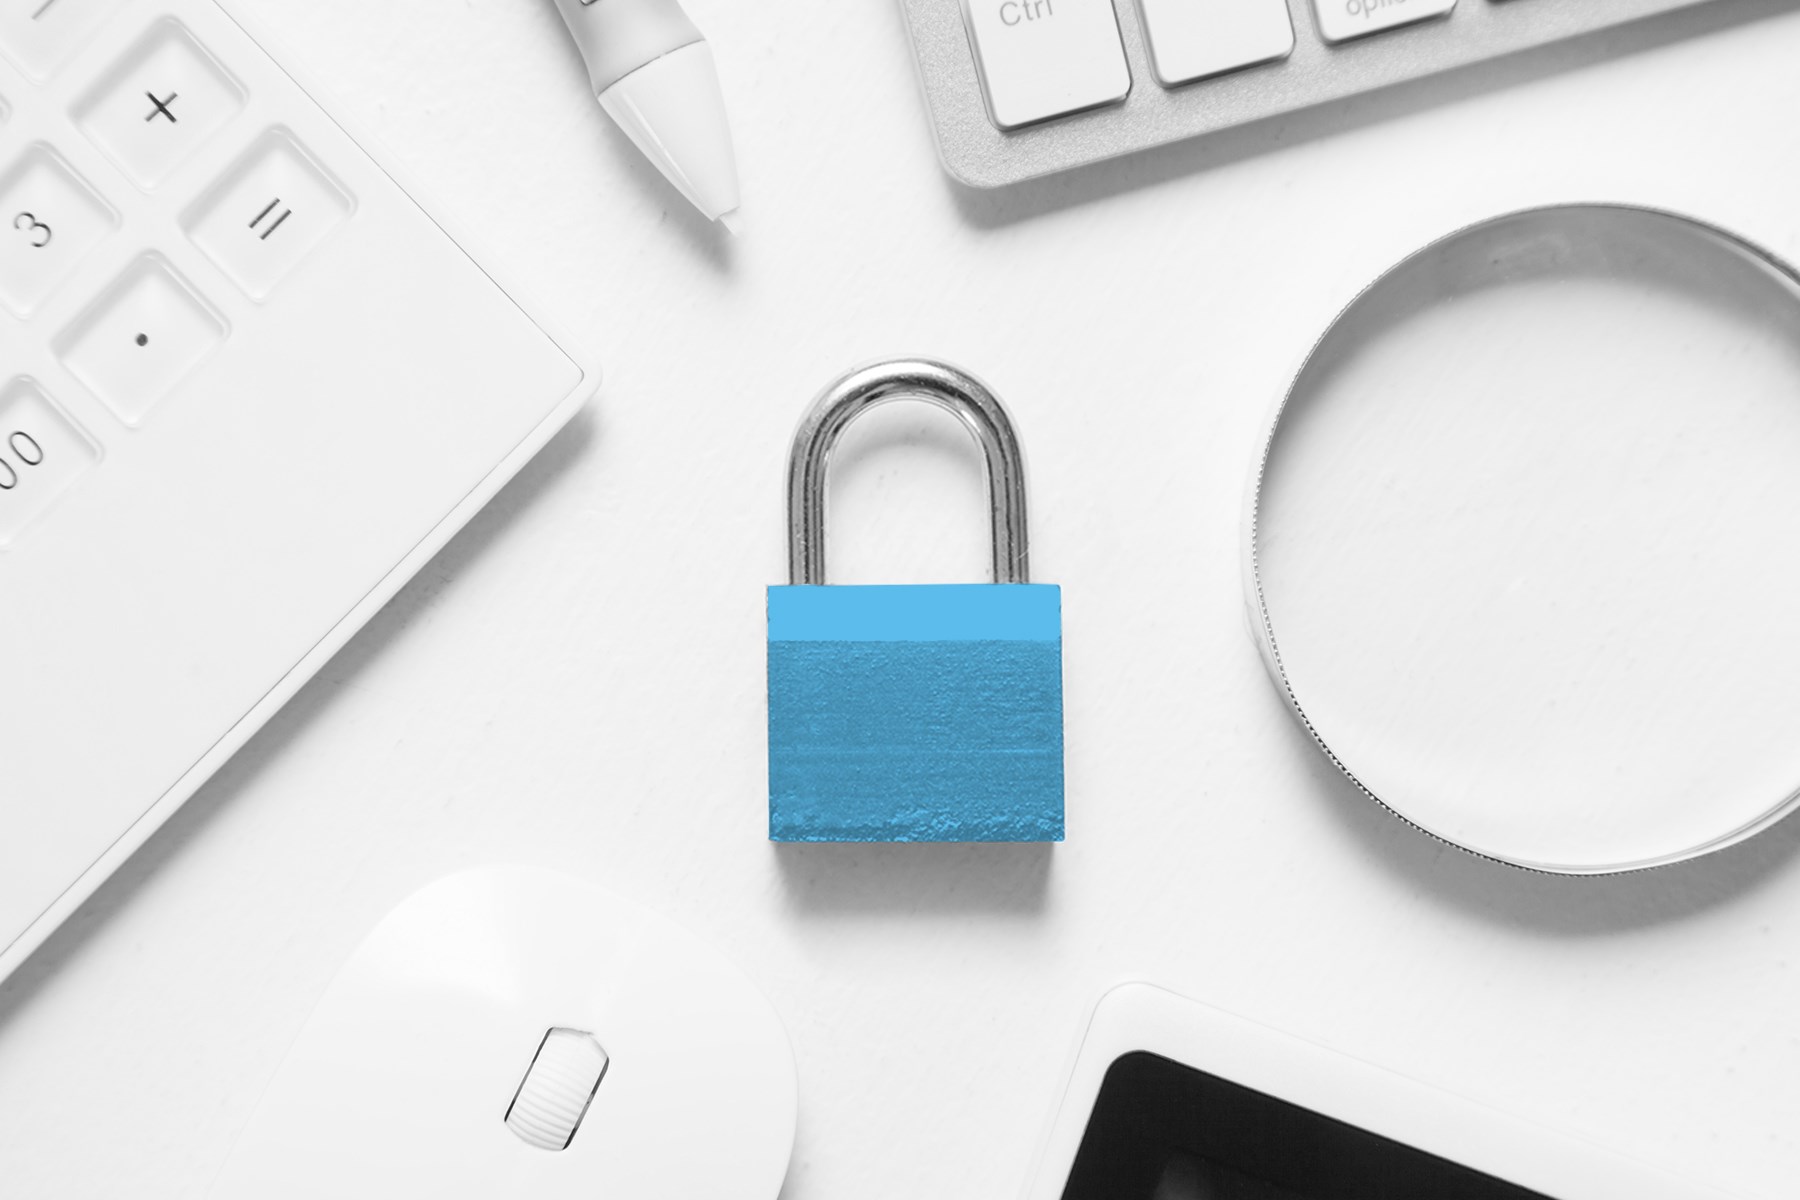 Blue padlock on a white background with stationary items